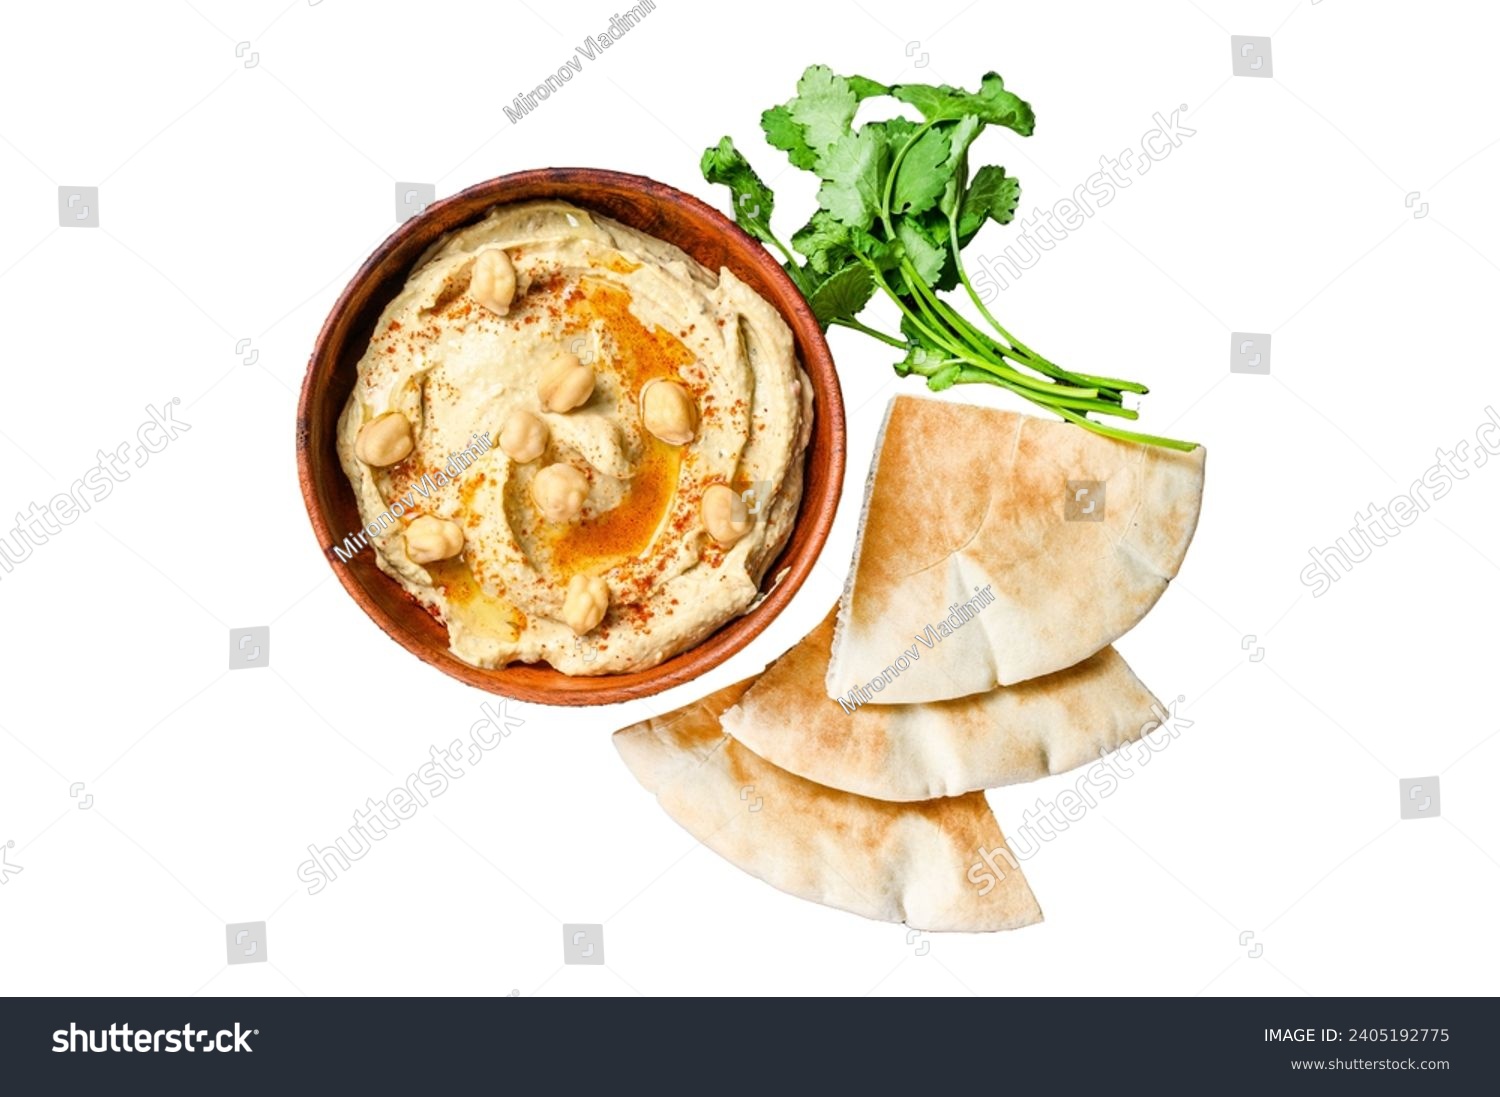 Hummus paste with pita bread, chickpea and parsley in a wooden bowl. Isolated on white background, top view #2405192775